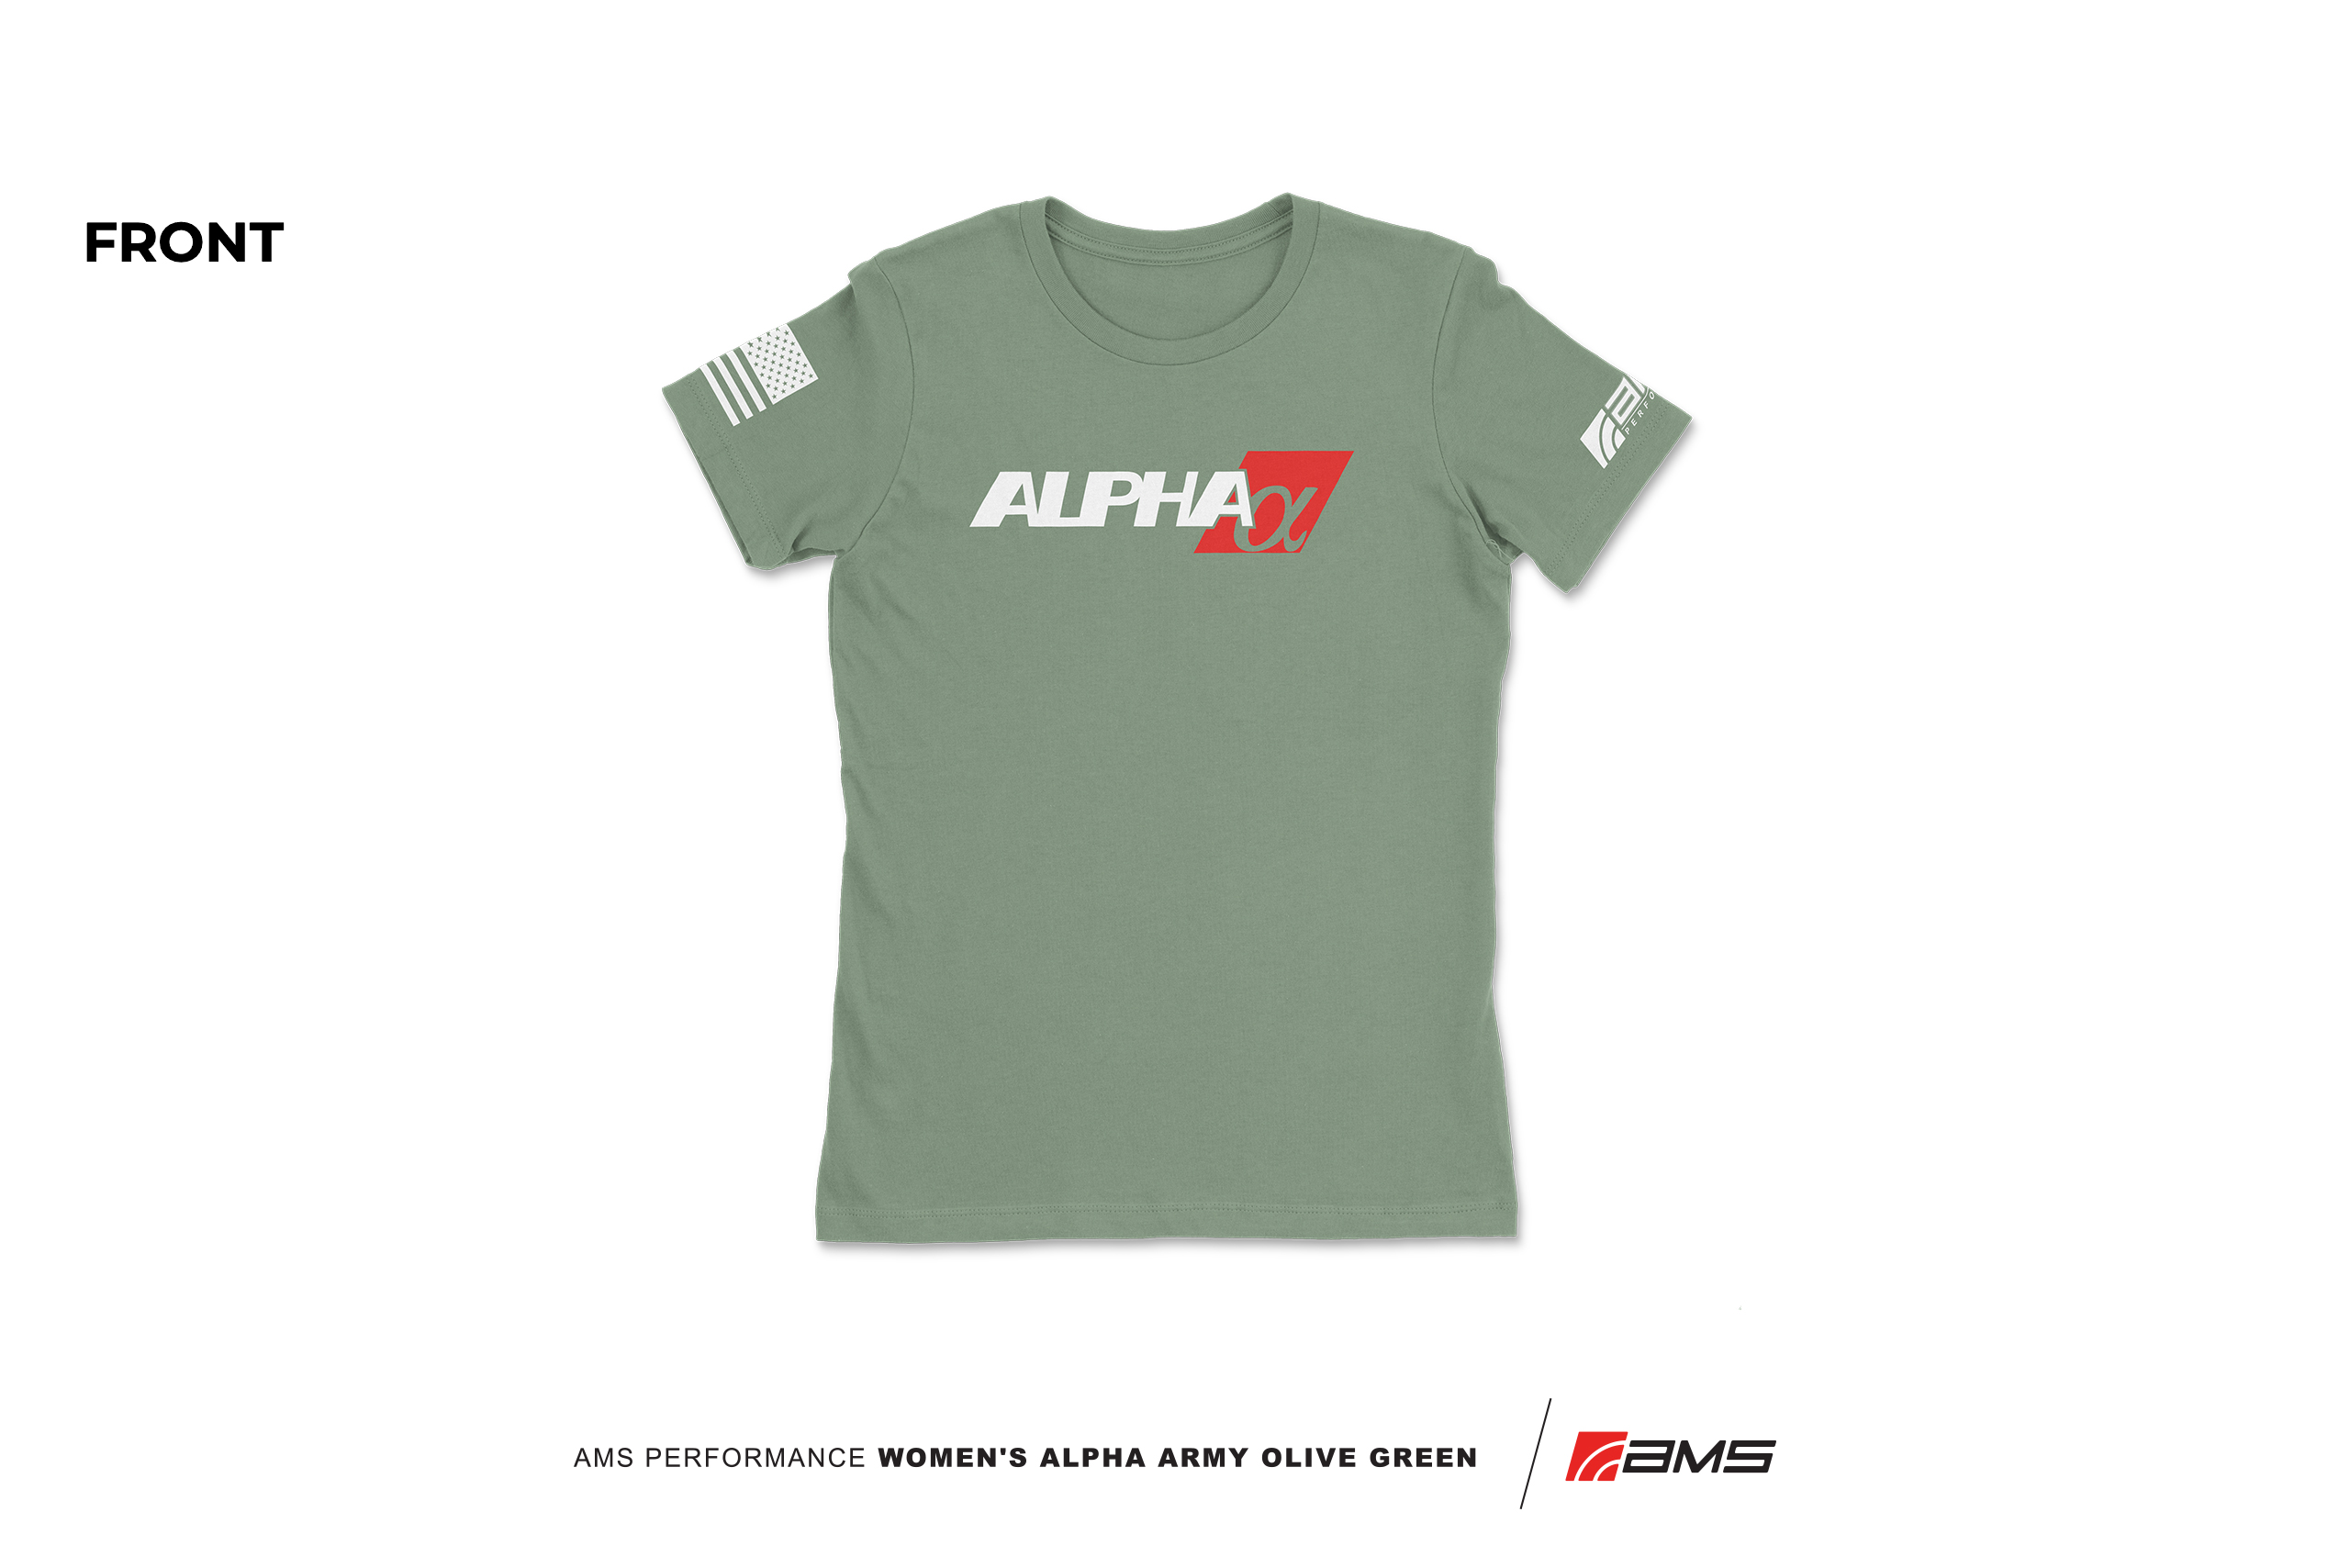 Women's Alpha Army Olive Green T-Shirt - AMS Performance